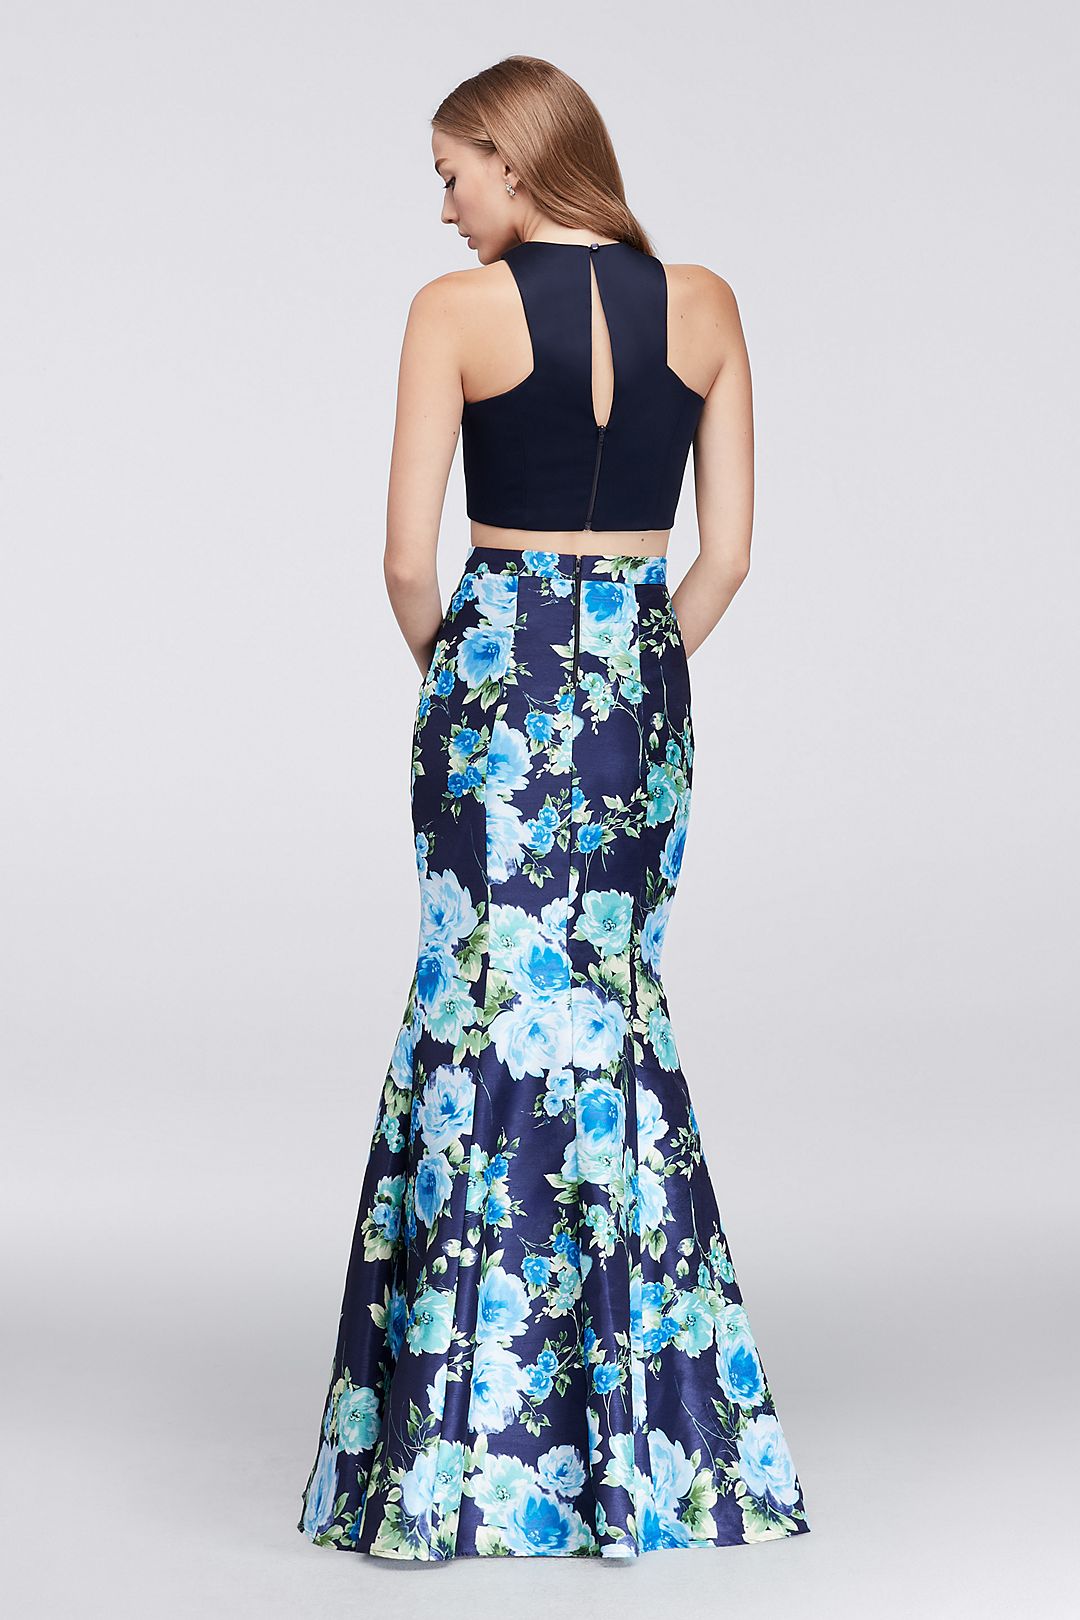 Crop Top and Floral Mermaid Two-Piece Dress Image 4